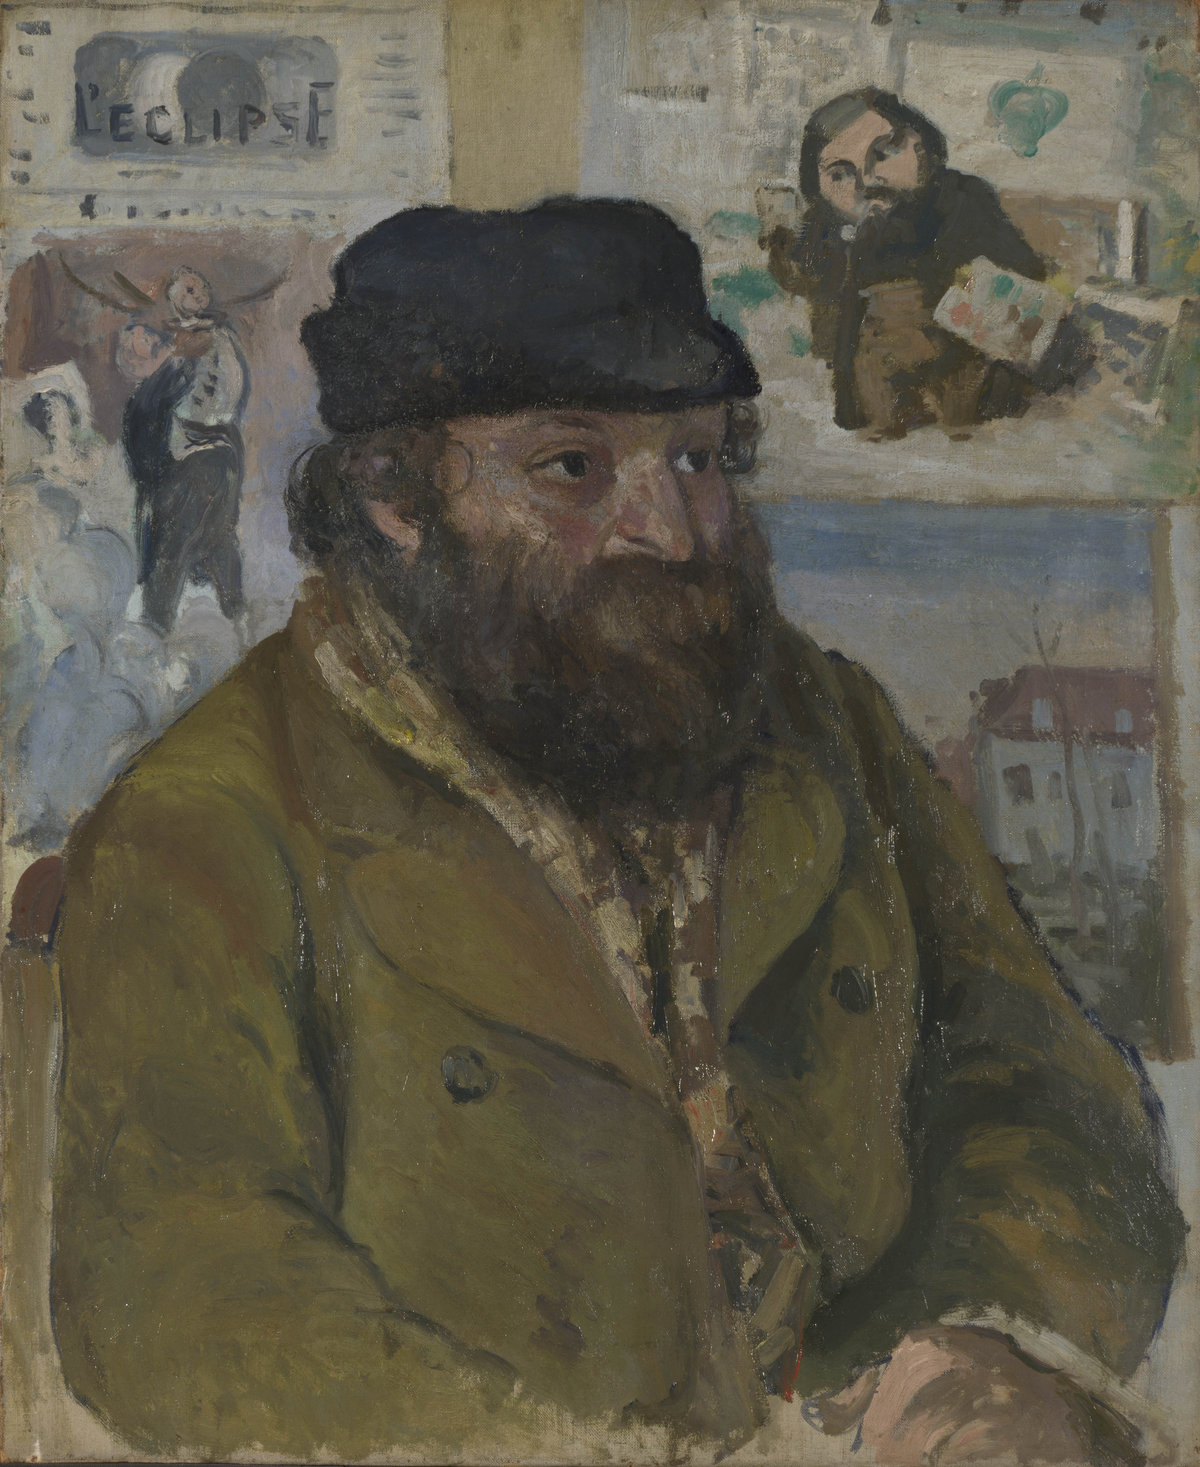 Camille Pissarro, Portrait of Cézanne, c. 1874, oil on canvas, 73 × 59.7 cm, National Gallery, London, on loan from Lawrence Graff